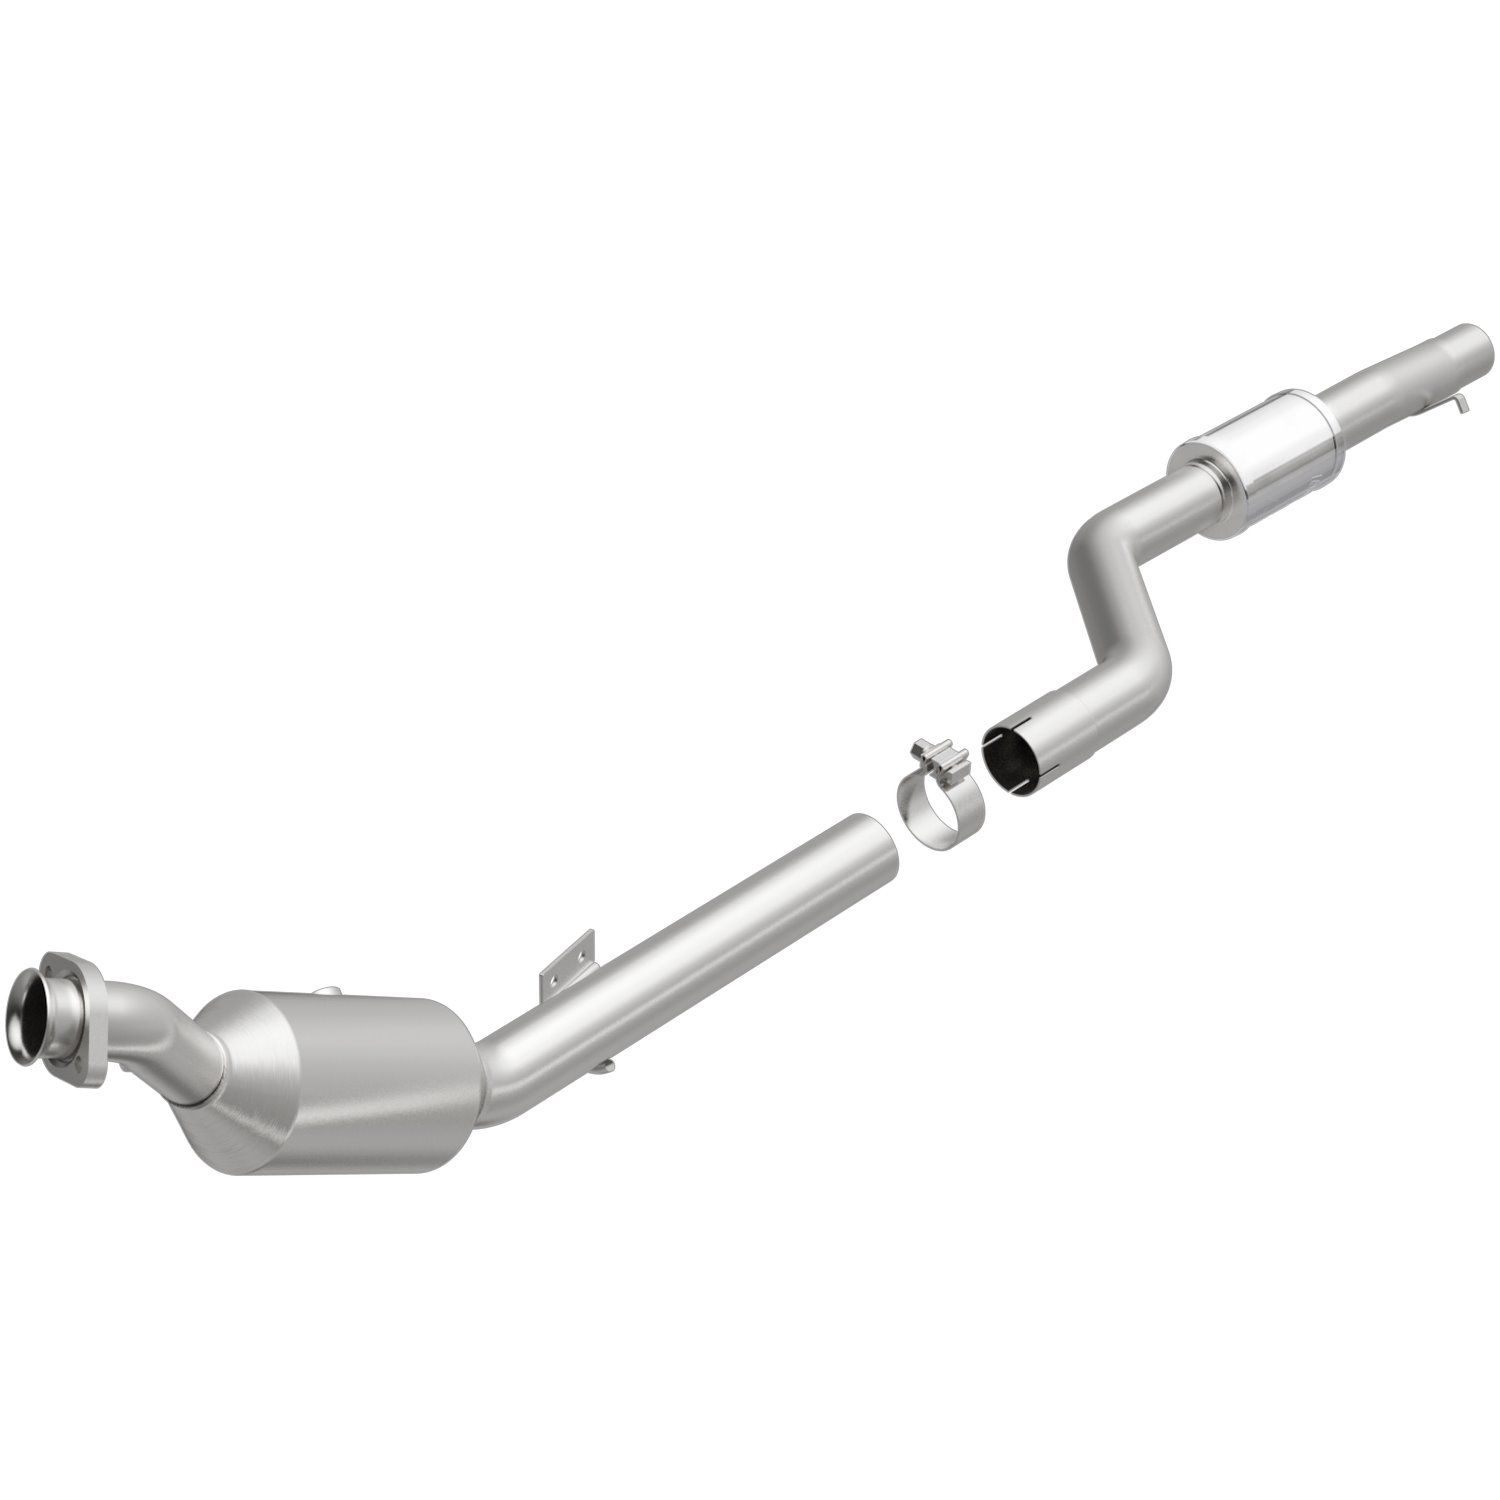 OEM Grade Federal / EPA Compliant Direct-Fit Catalytic Converter 21-569